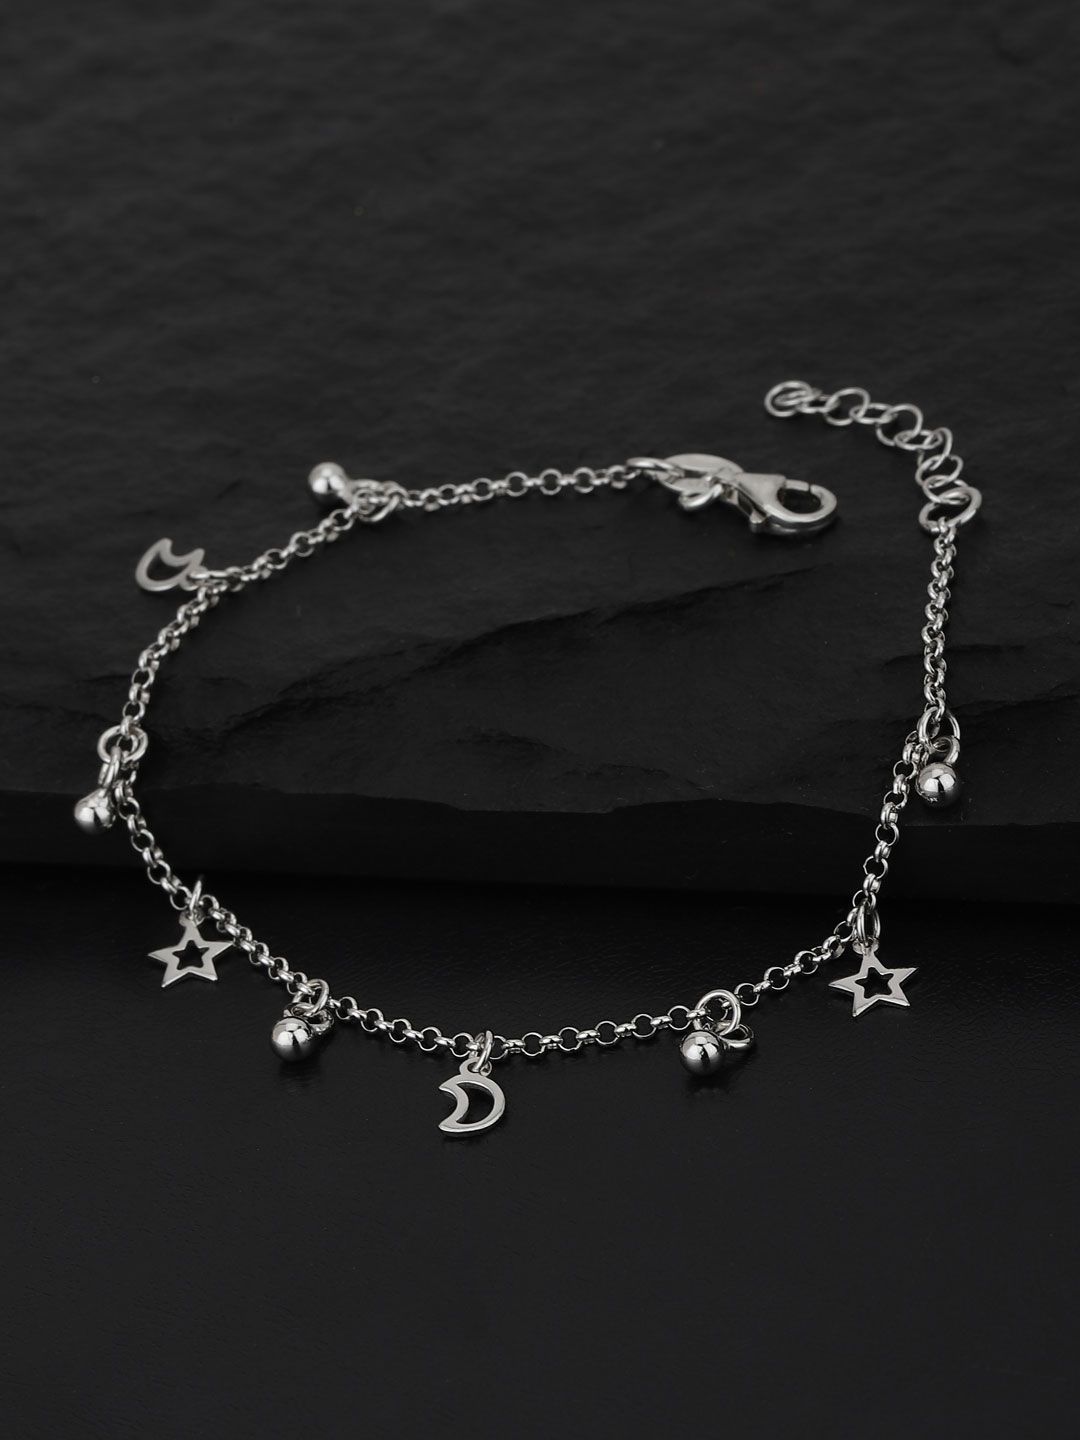 VANBELLE Women 925 Sterling Silver Handcrafted Rhodium-Plated Charm Bracelet Price in India